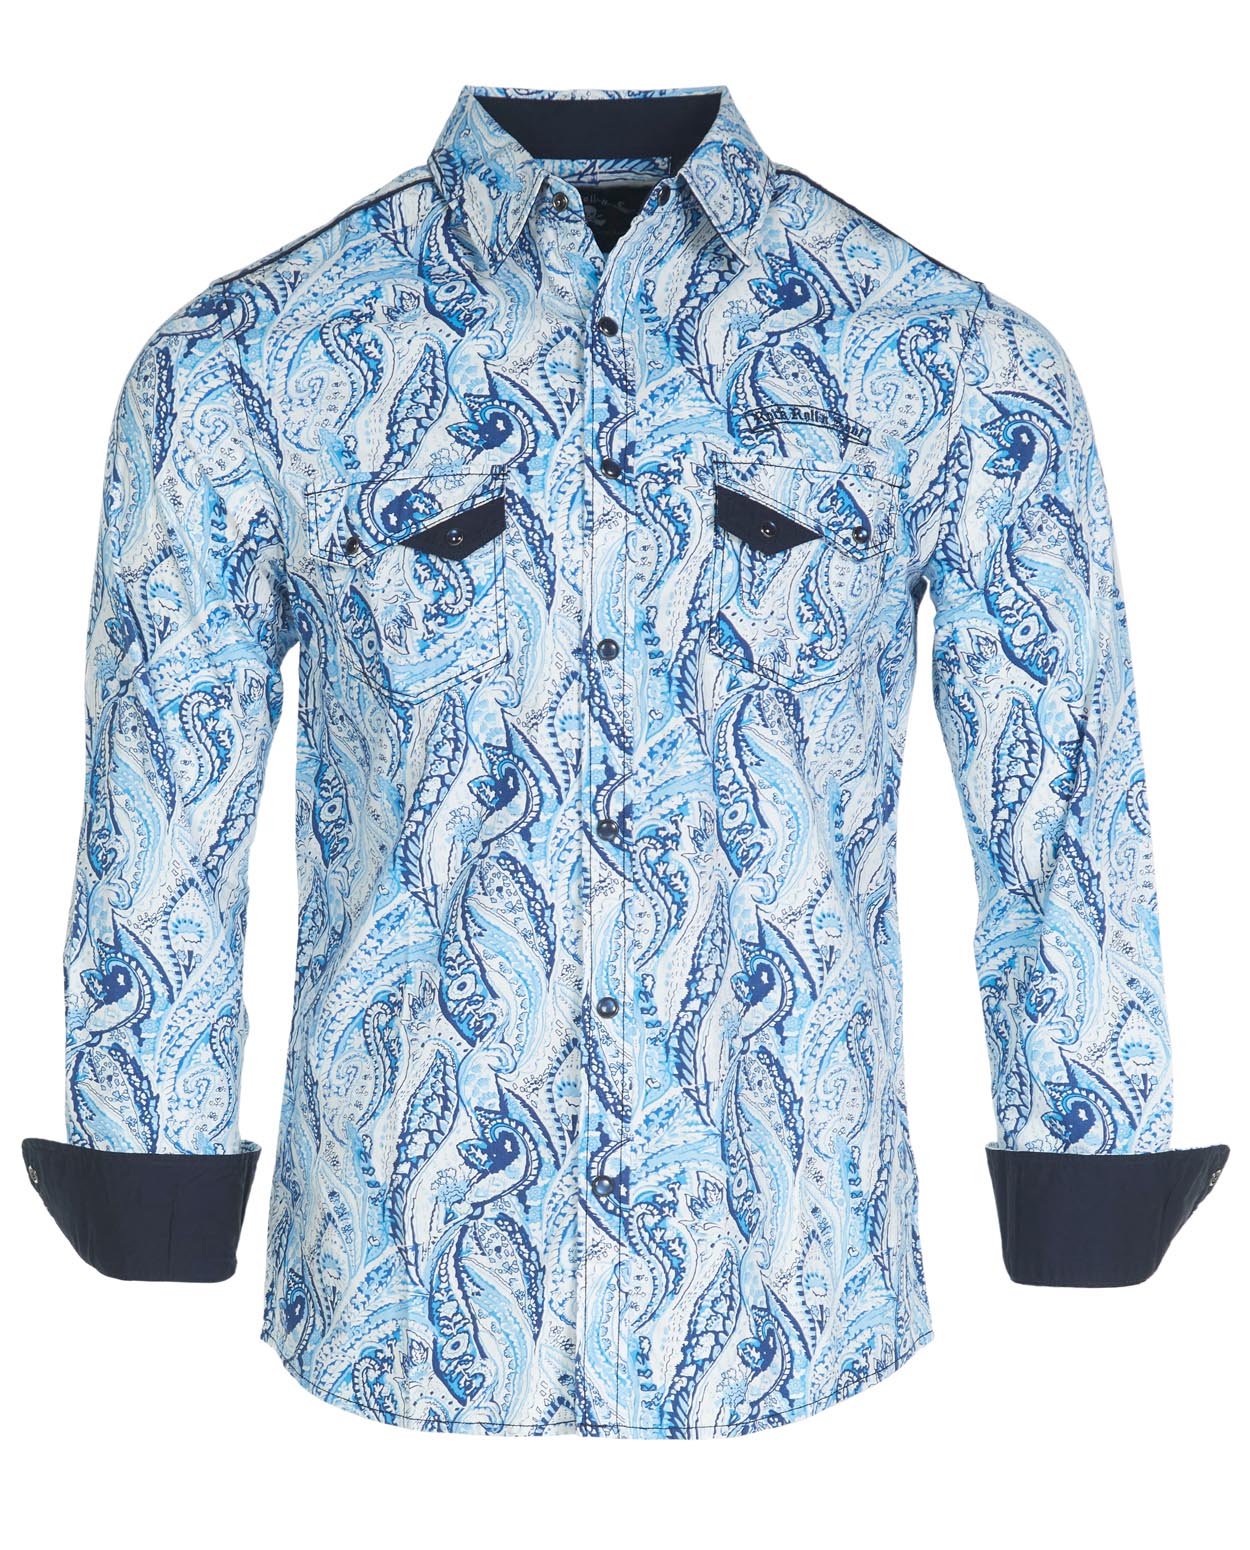 Blue Paisley Shirt Outfits For Men (22 ideas & outfits)